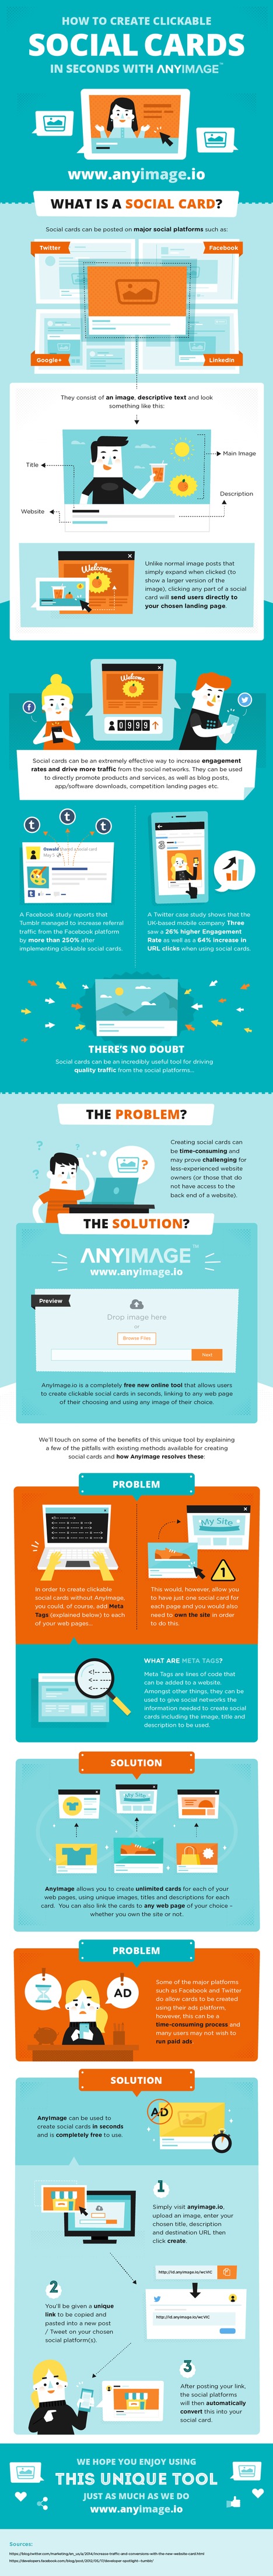 Anyimage.io - Create Clickable Social Cards in Seconds